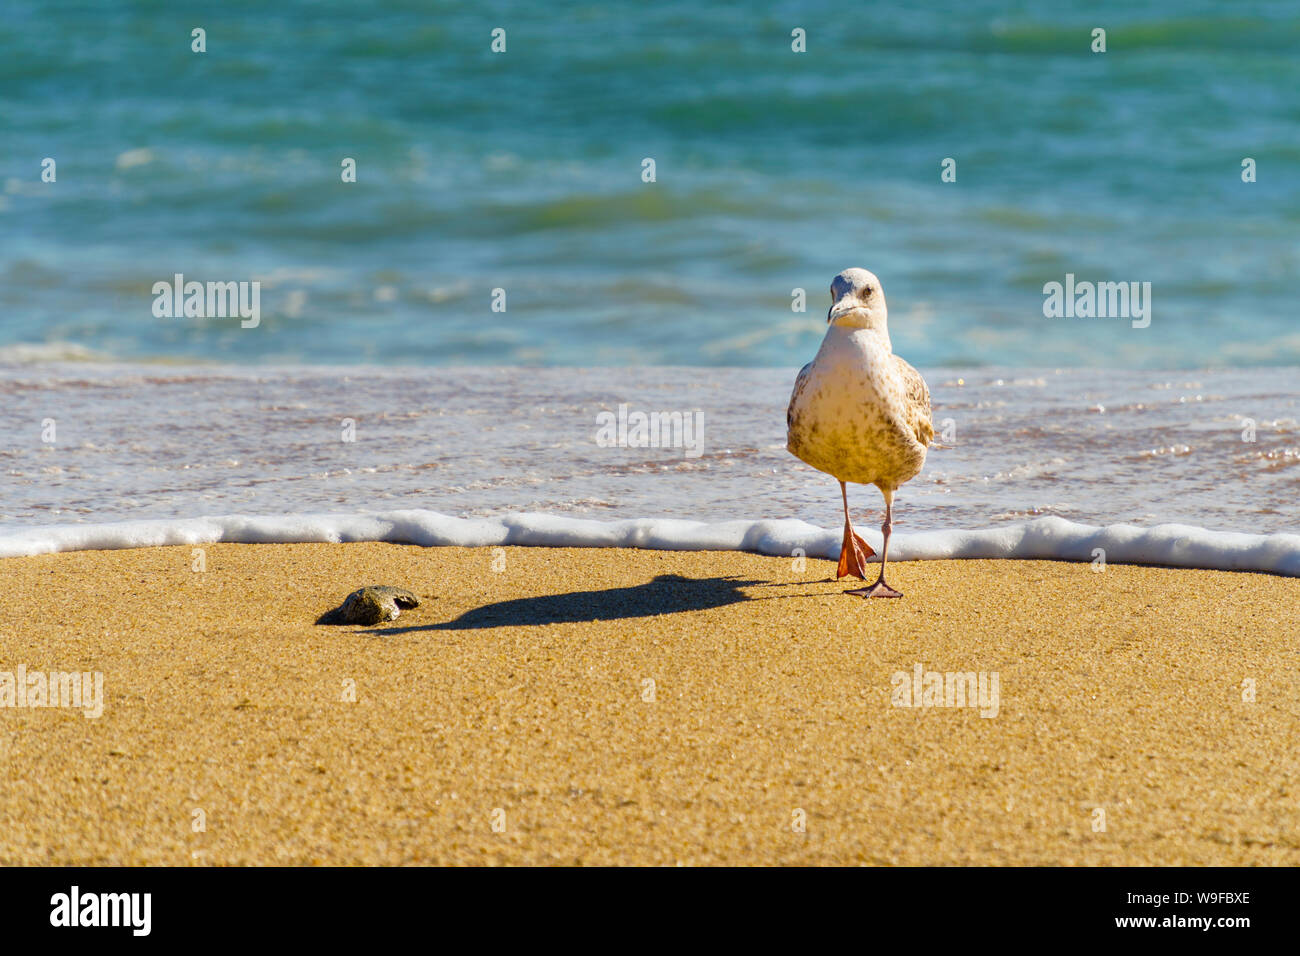 A seagull running away from the incoming surf at the beach of Olhos d'agua, Portugal at sunset (eye-level view, landscape horizontal format) Stock Photo